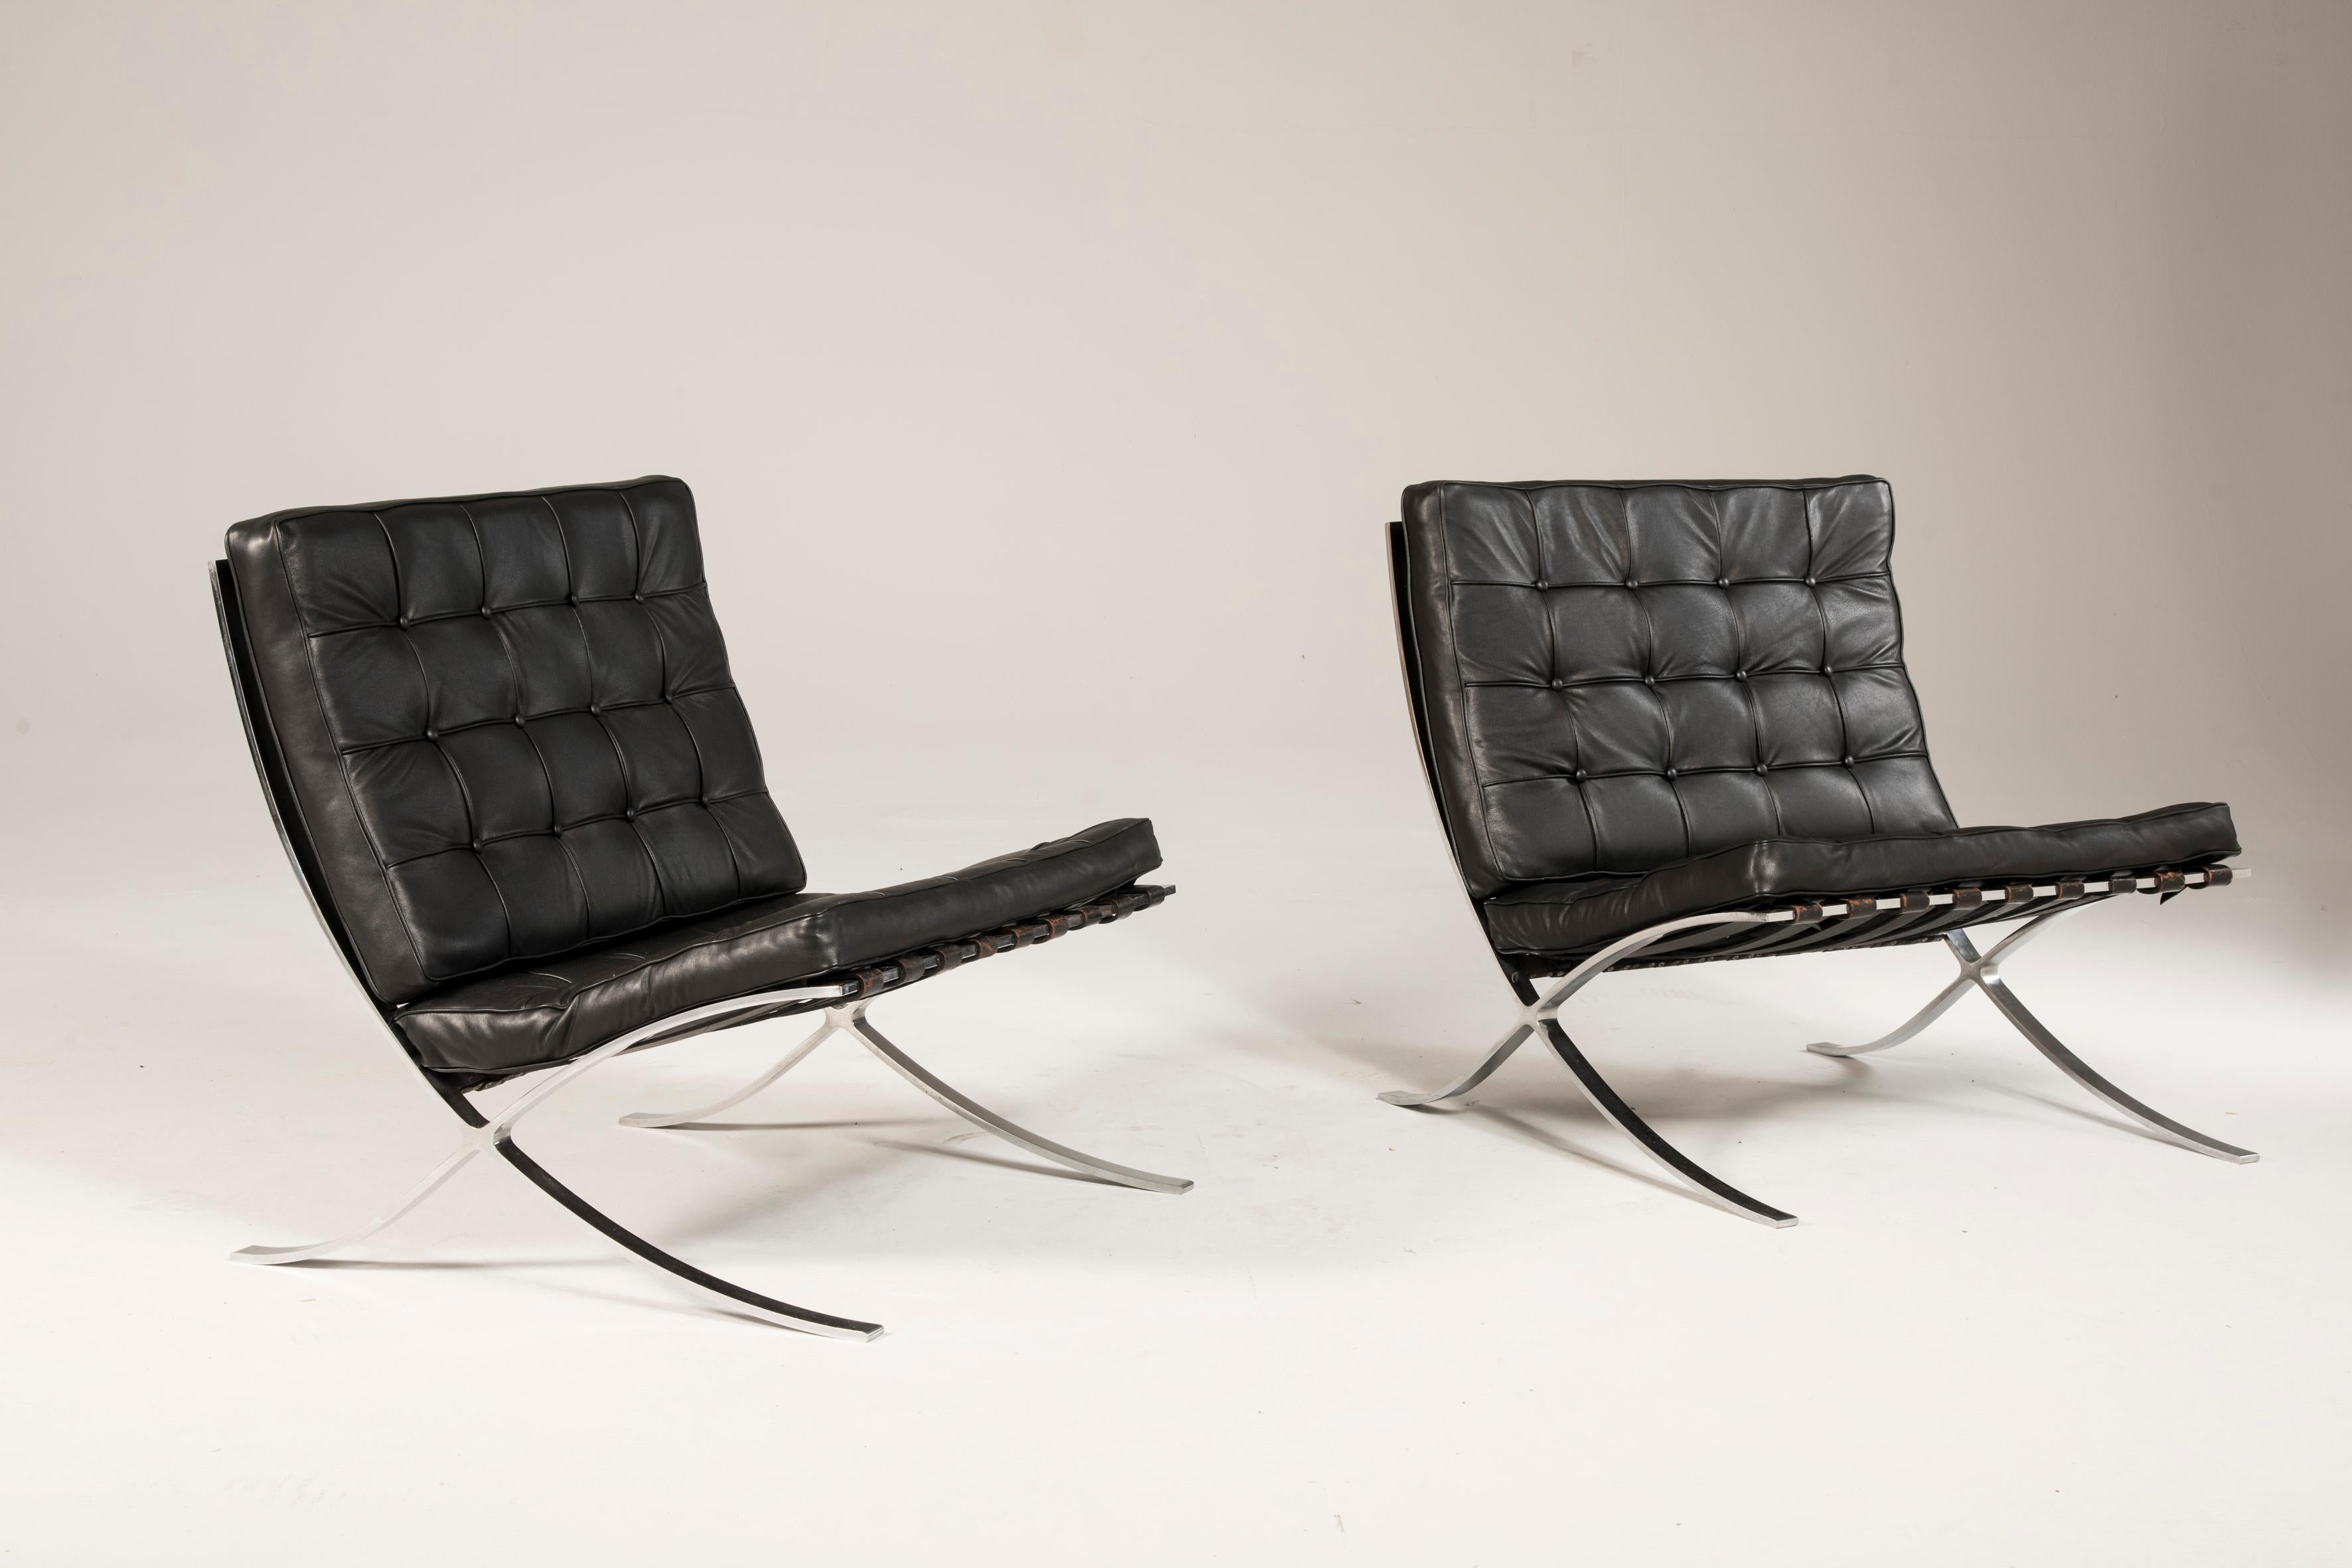 Barcelona armchairs, 1980s production, set of two armchairs. Excellent conditions. They feature original sticker. The leather cushions have been renewed with 